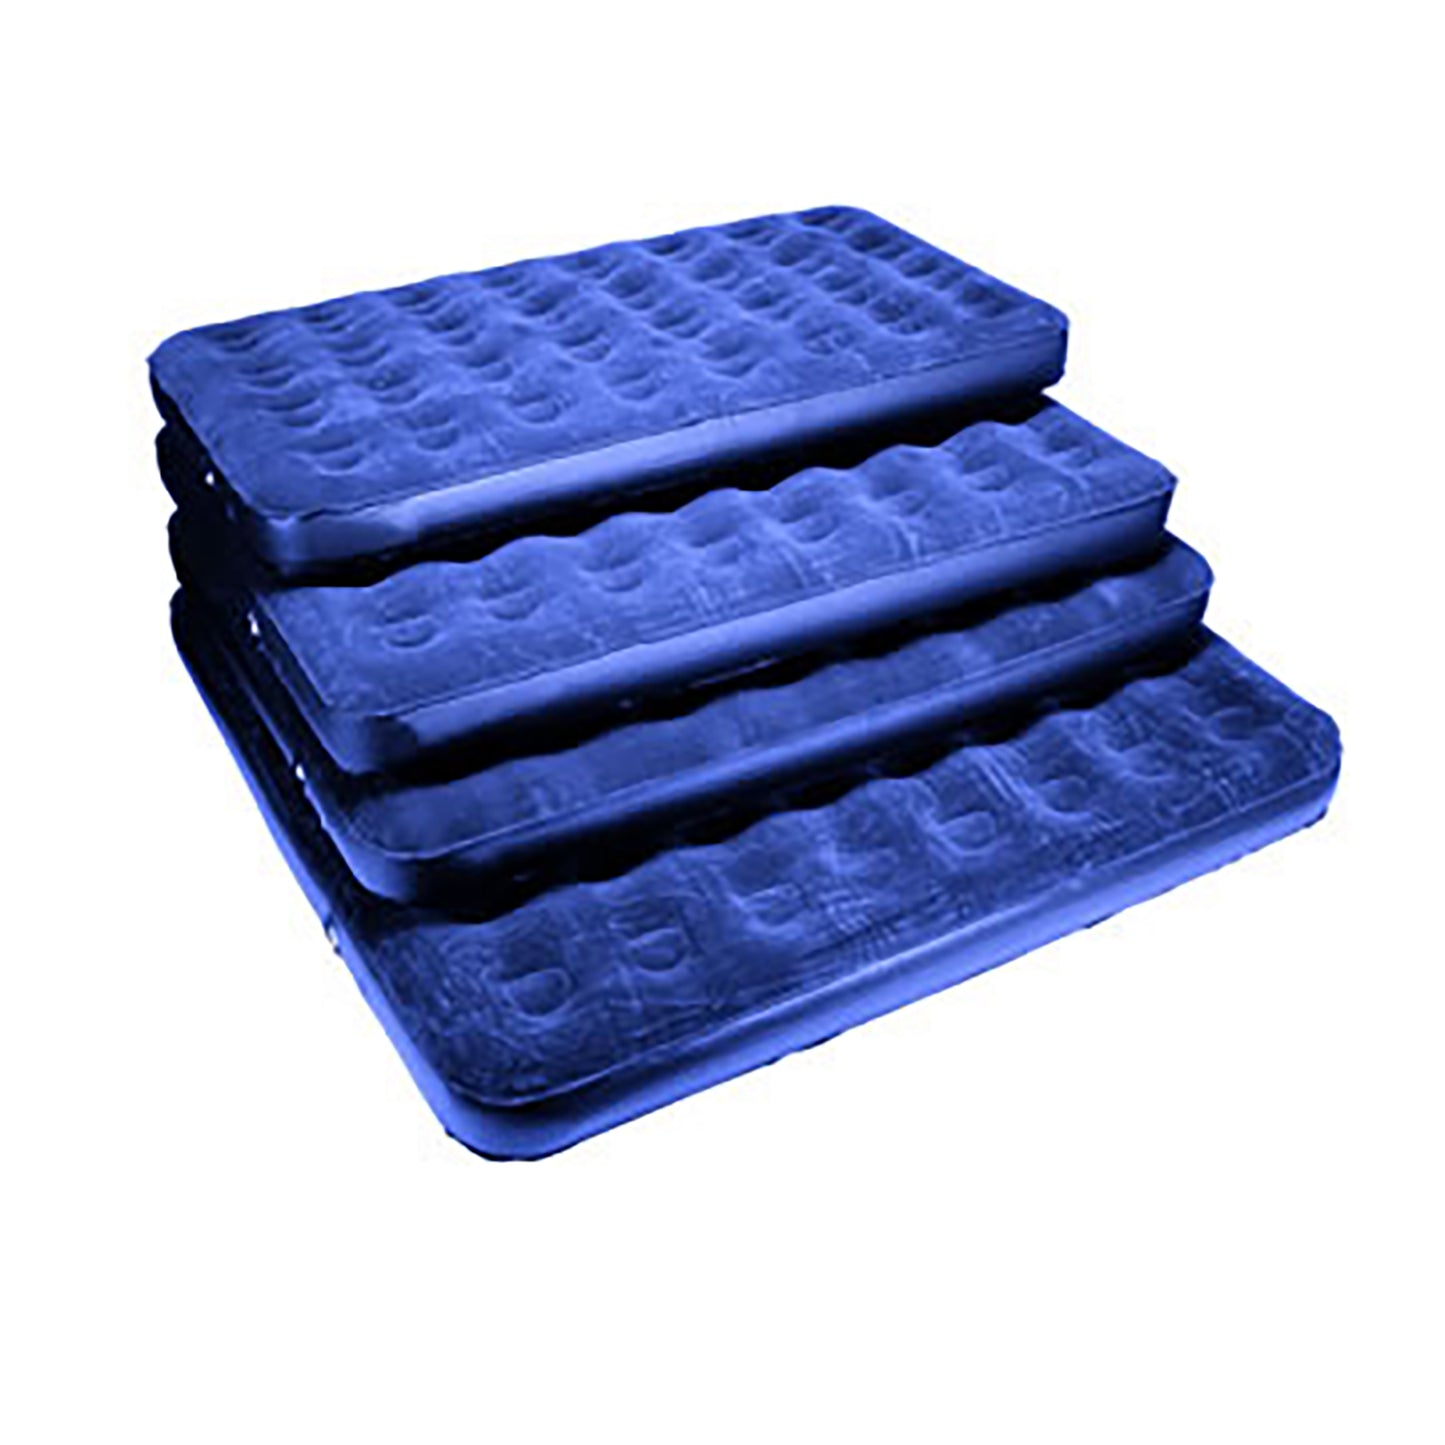 VALUE LINE FULL AIR BED